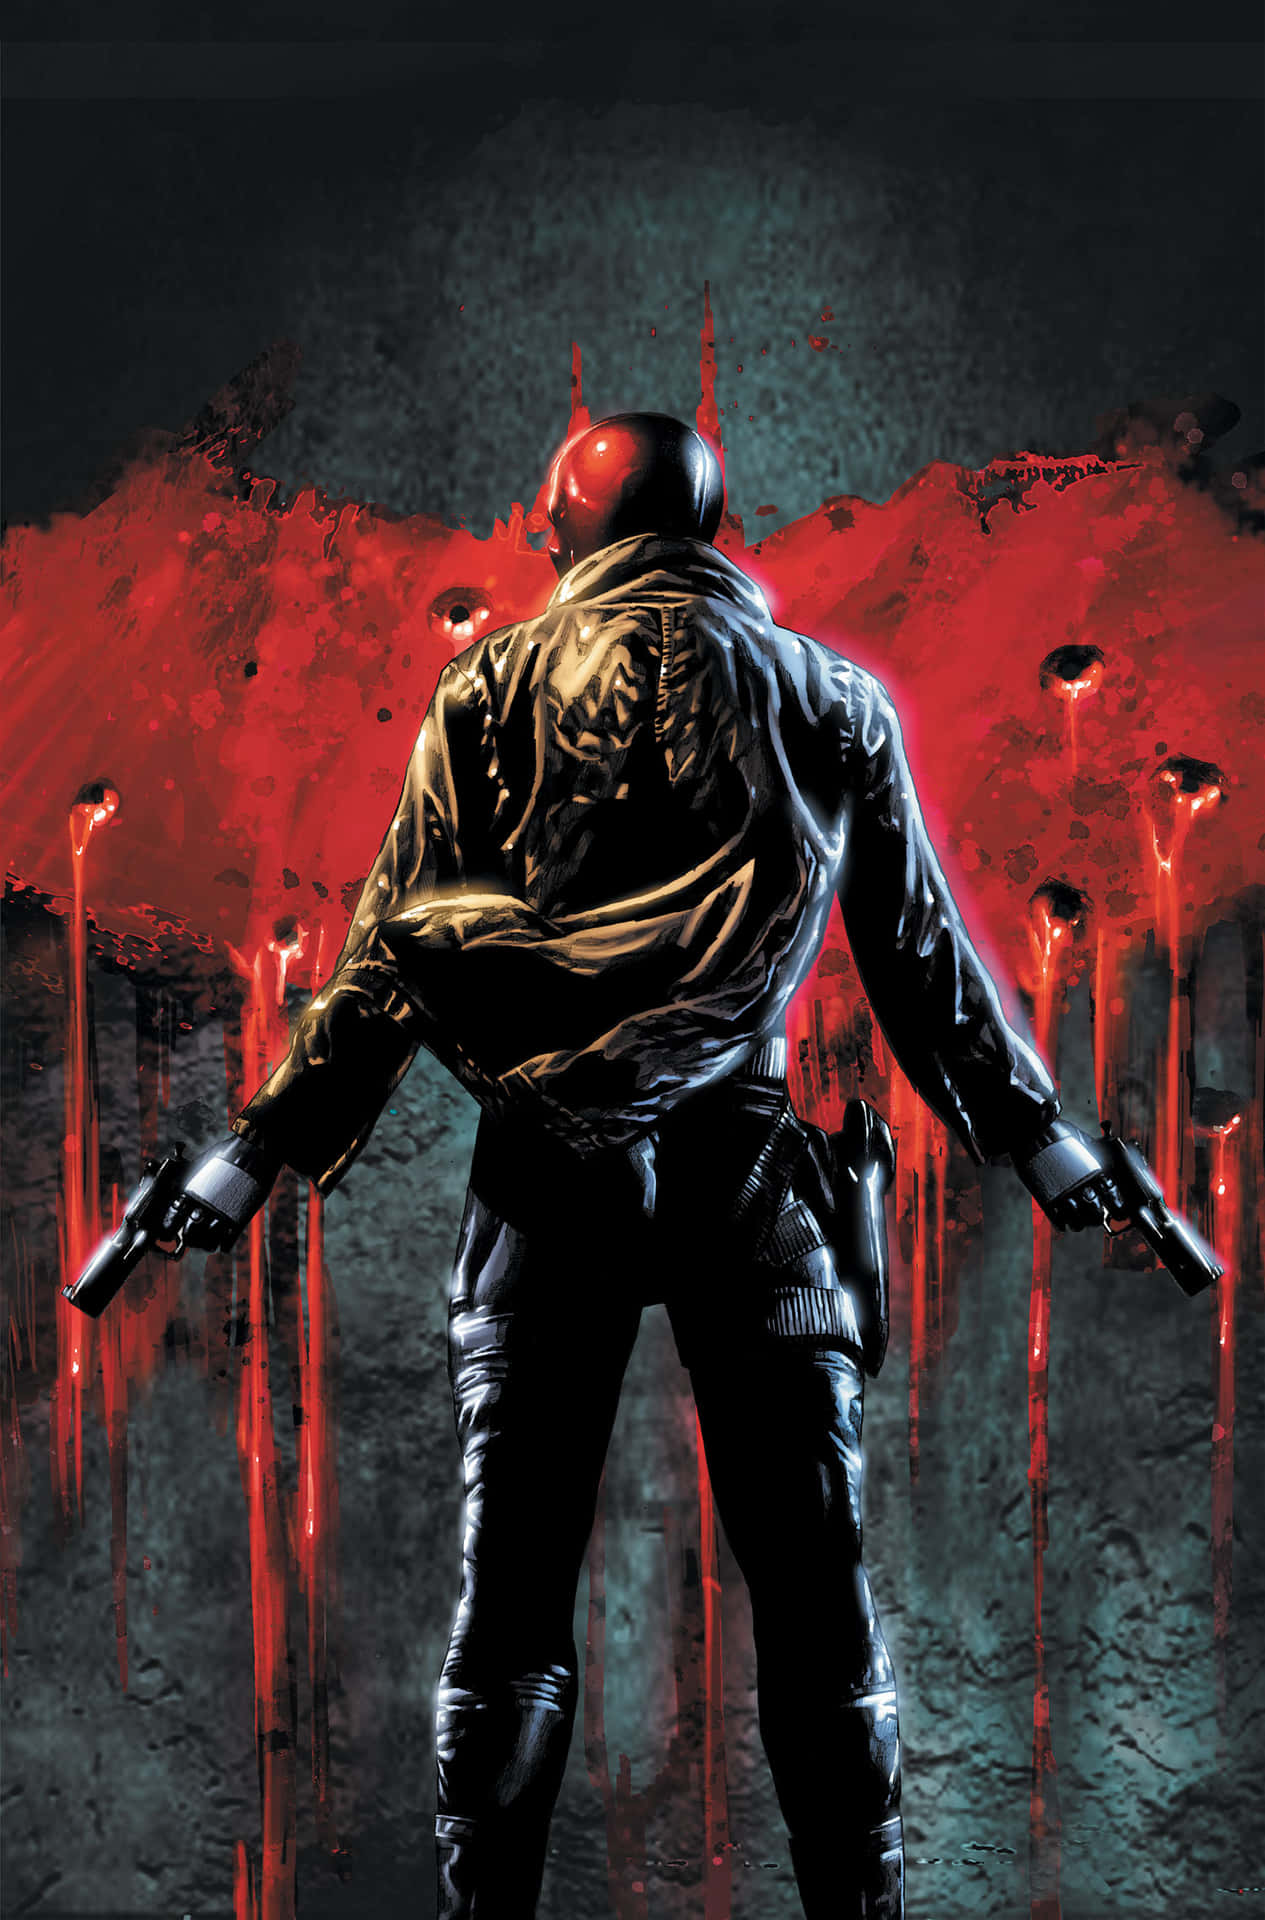 A picture of Red Hood against a red background.